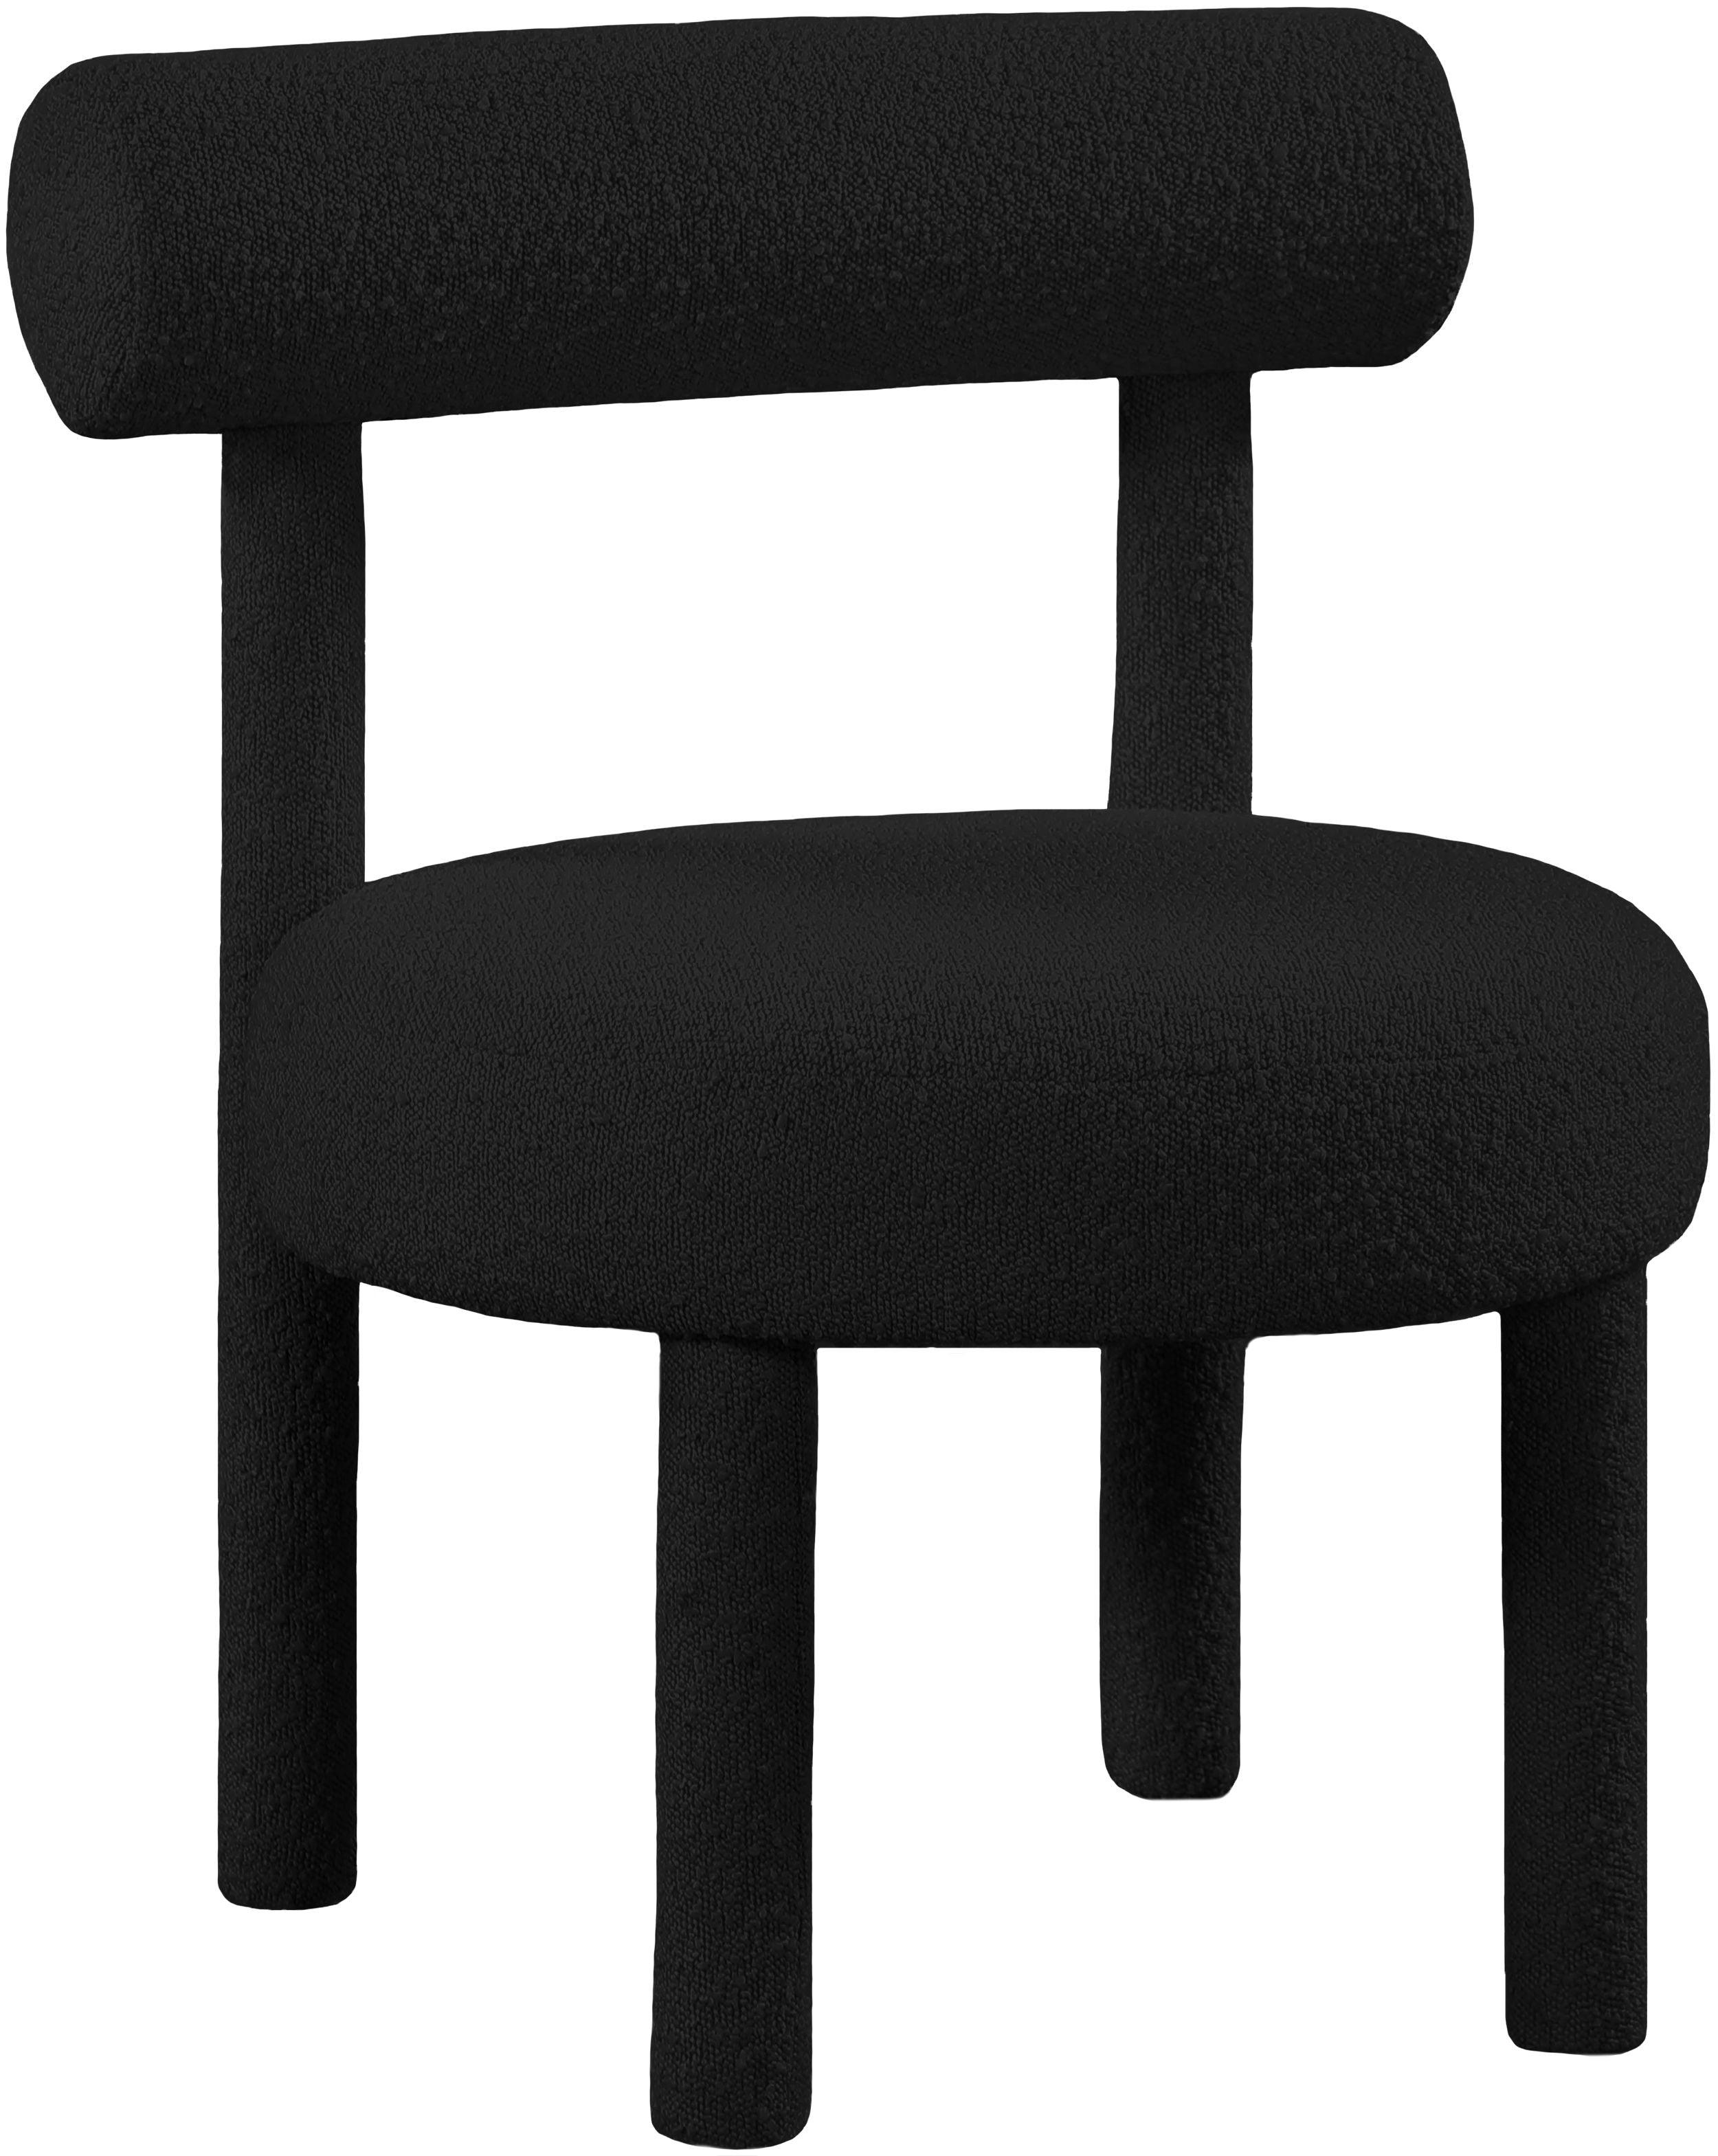 Meridian Furniture - Parlor - Accent Chair - 5th Avenue Furniture